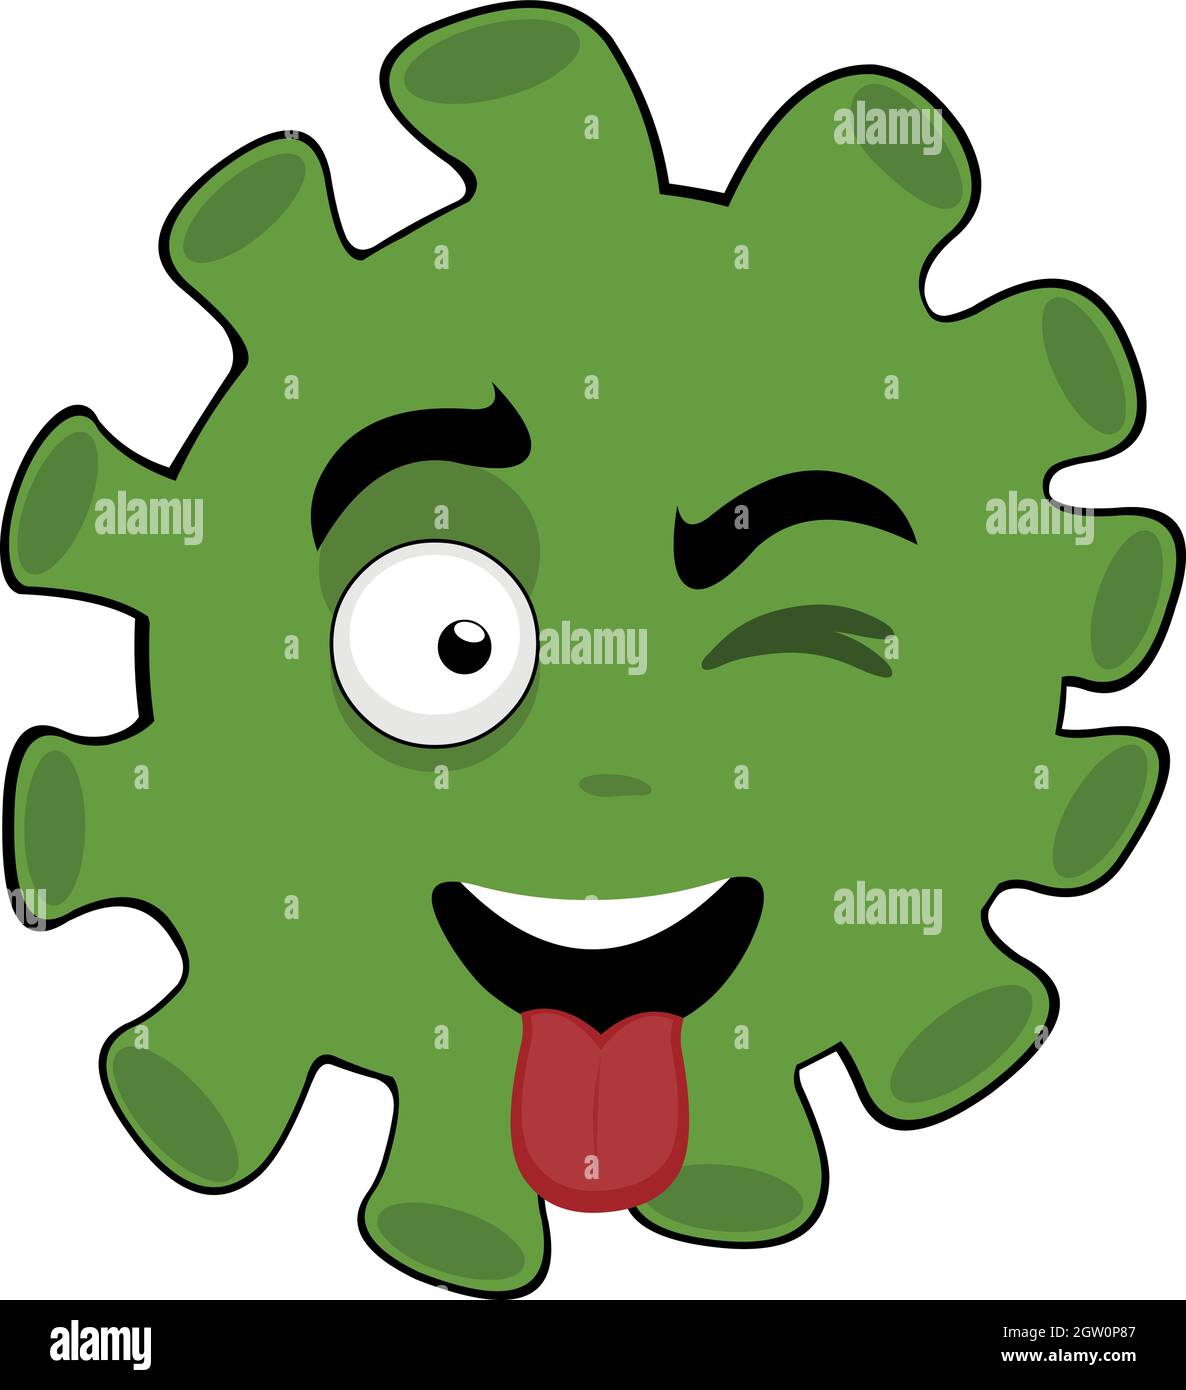 Vector emoticon illustration of virus, microbe or bacteria cartoon, winking and with tongue out Stock Vector